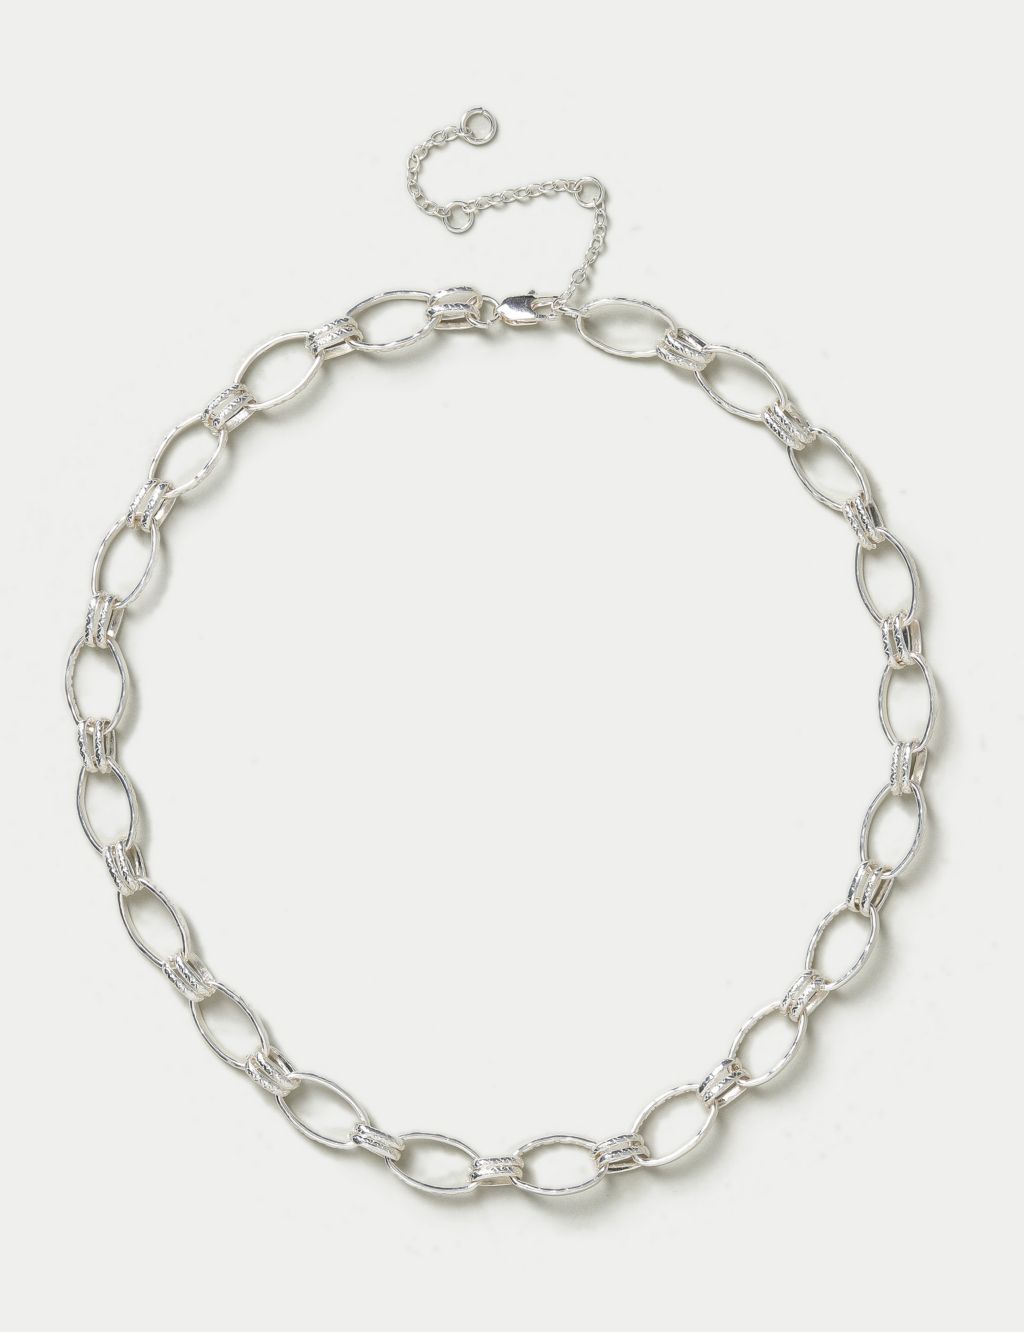 Silver Tone Beaten Link Chain Necklace